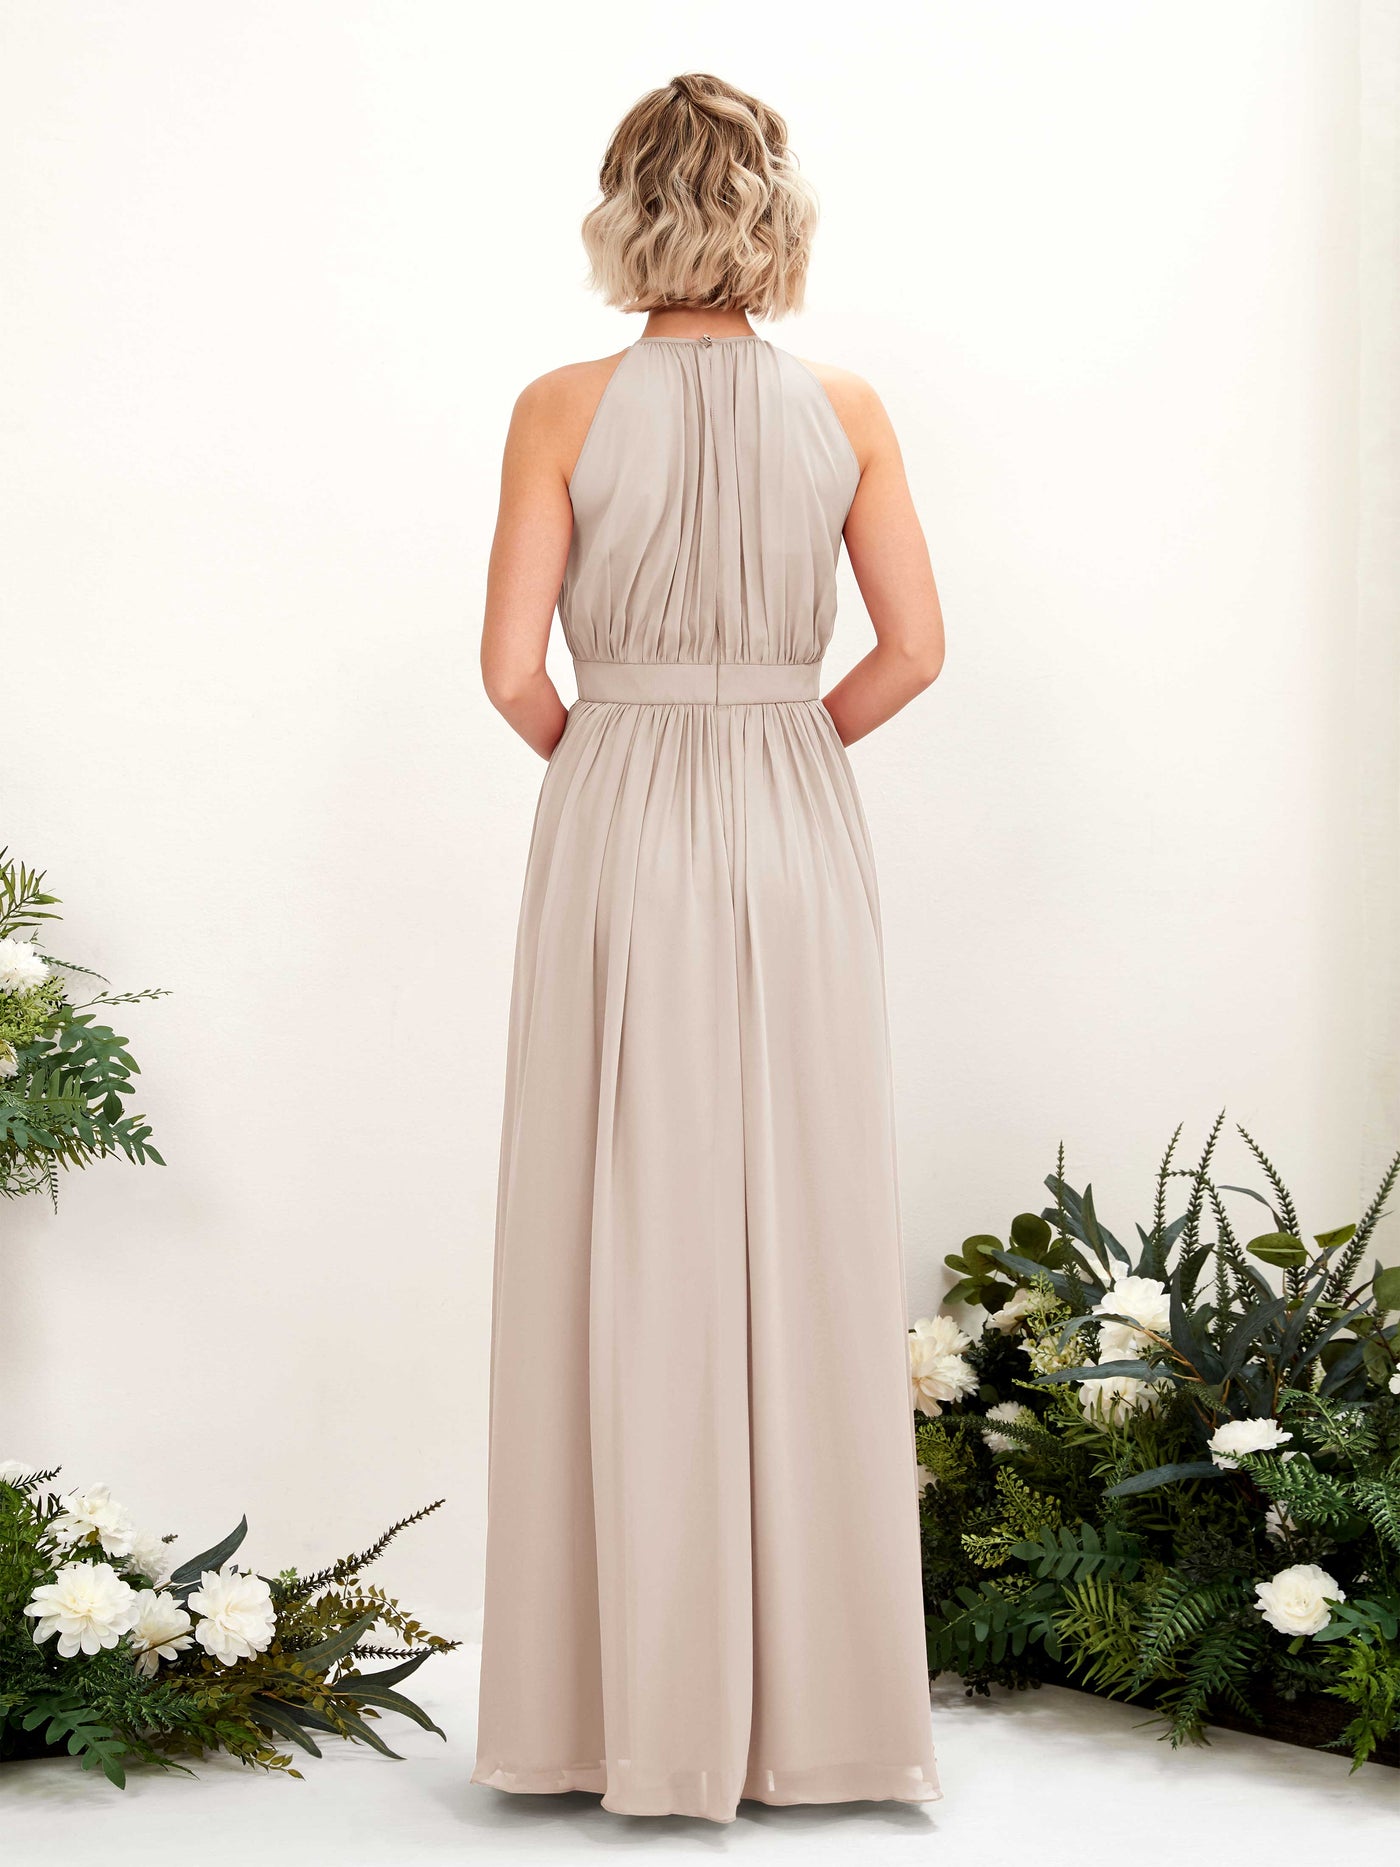 Champagne Bridesmaid Dresses Bridesmaid Dress A-line Chiffon Halter Full Length Sleeveless Wedding Party Dress (81223116)#color_champagne